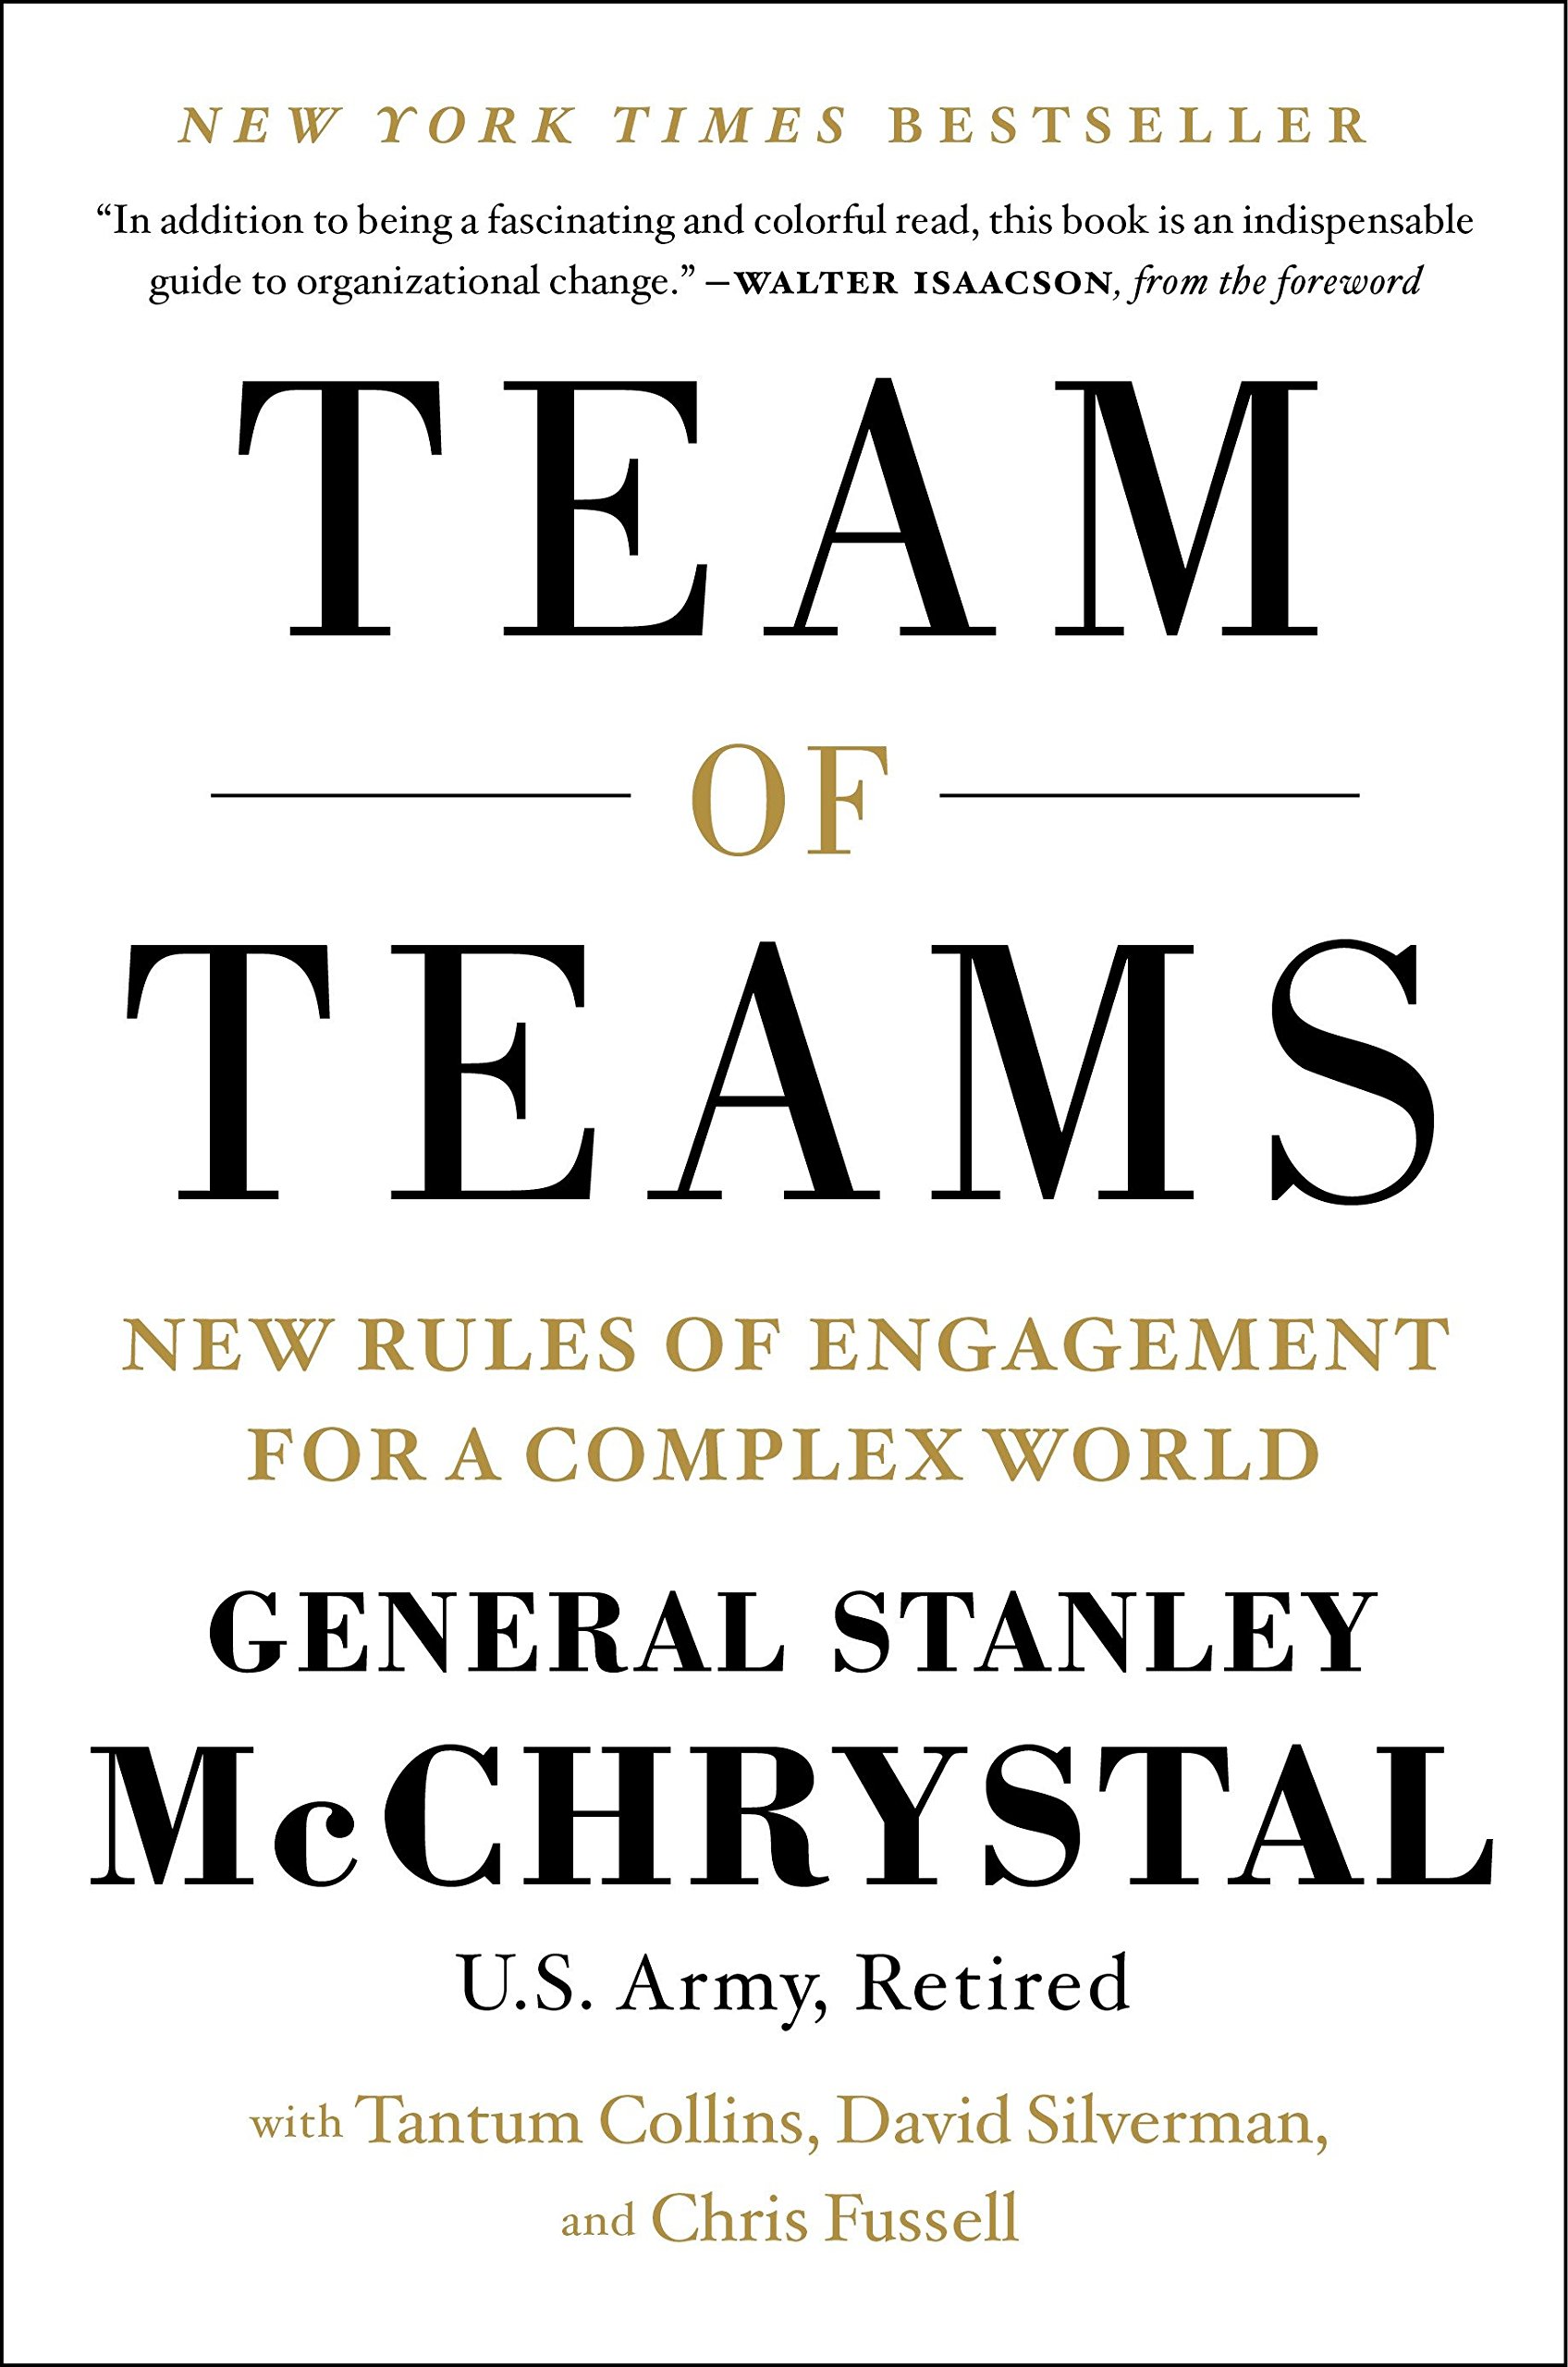 The book cover for Team of Teams.